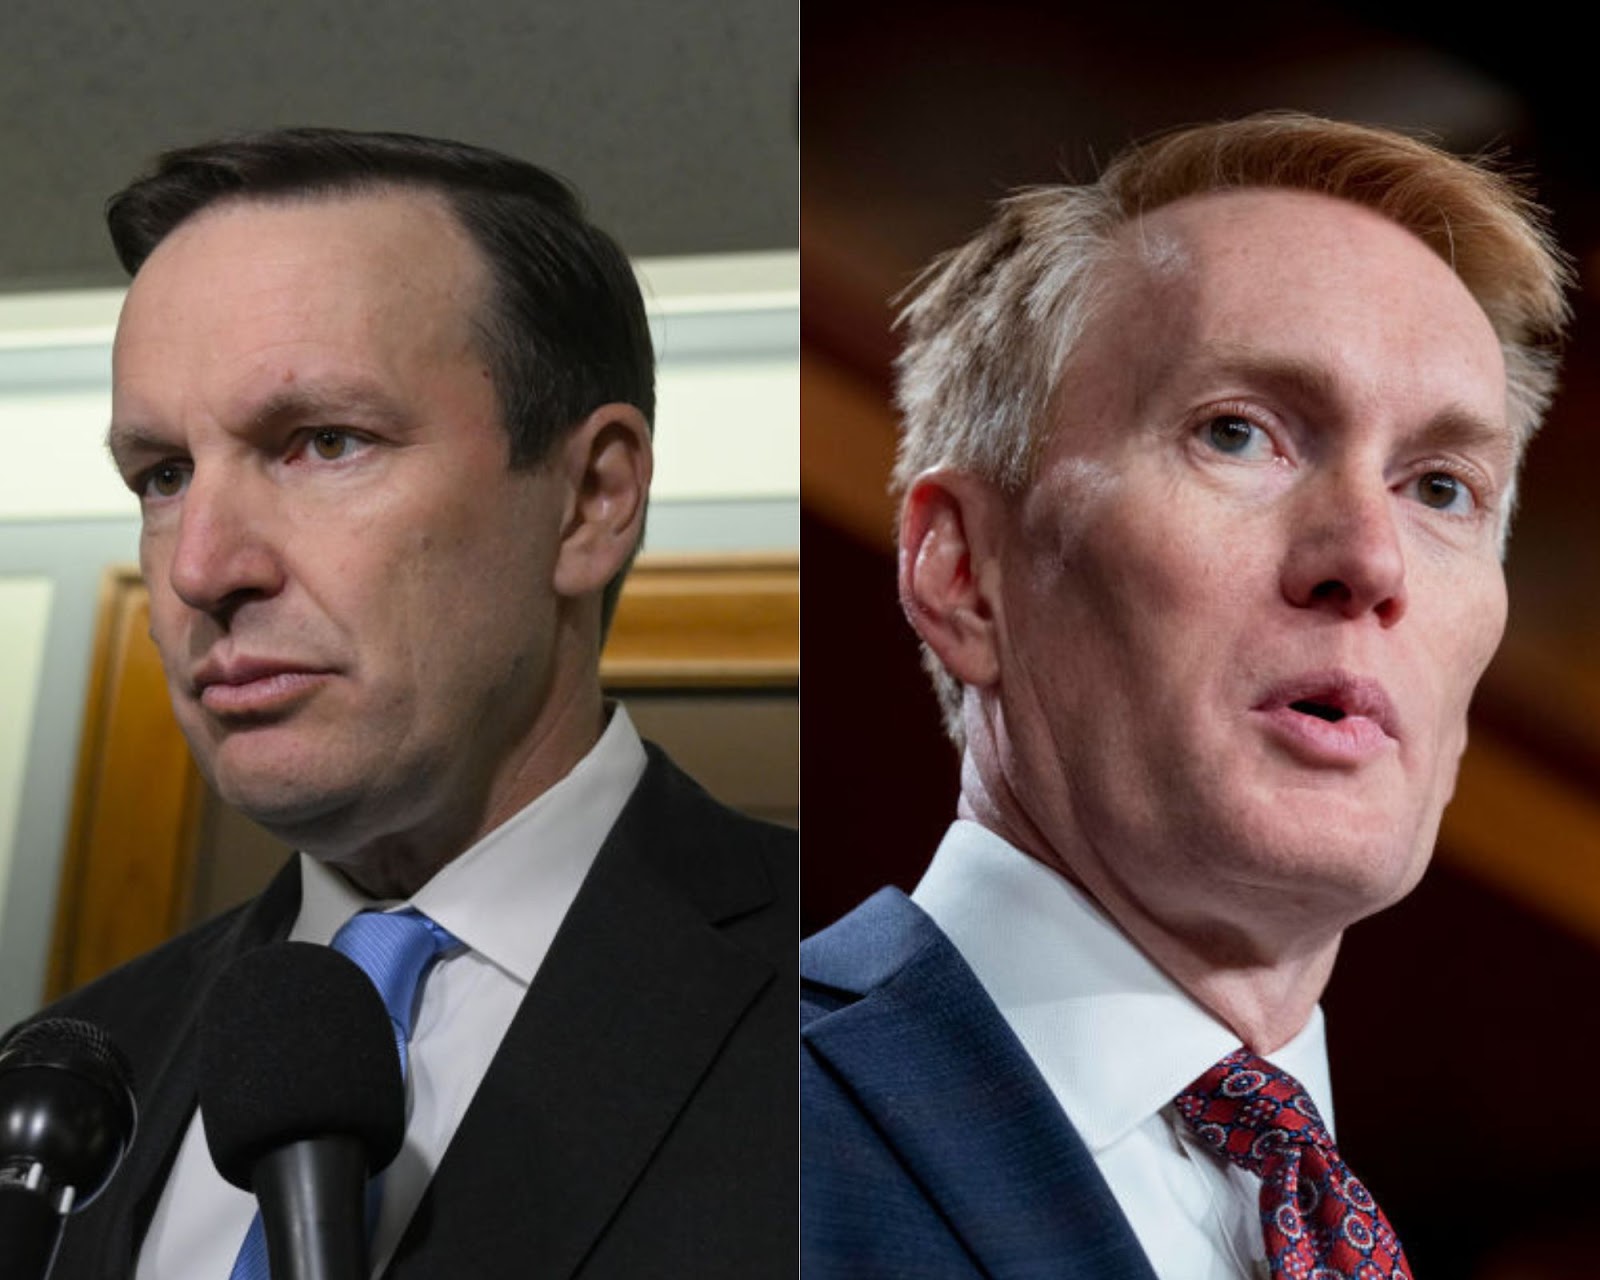 Chris Murphy and James Lankford